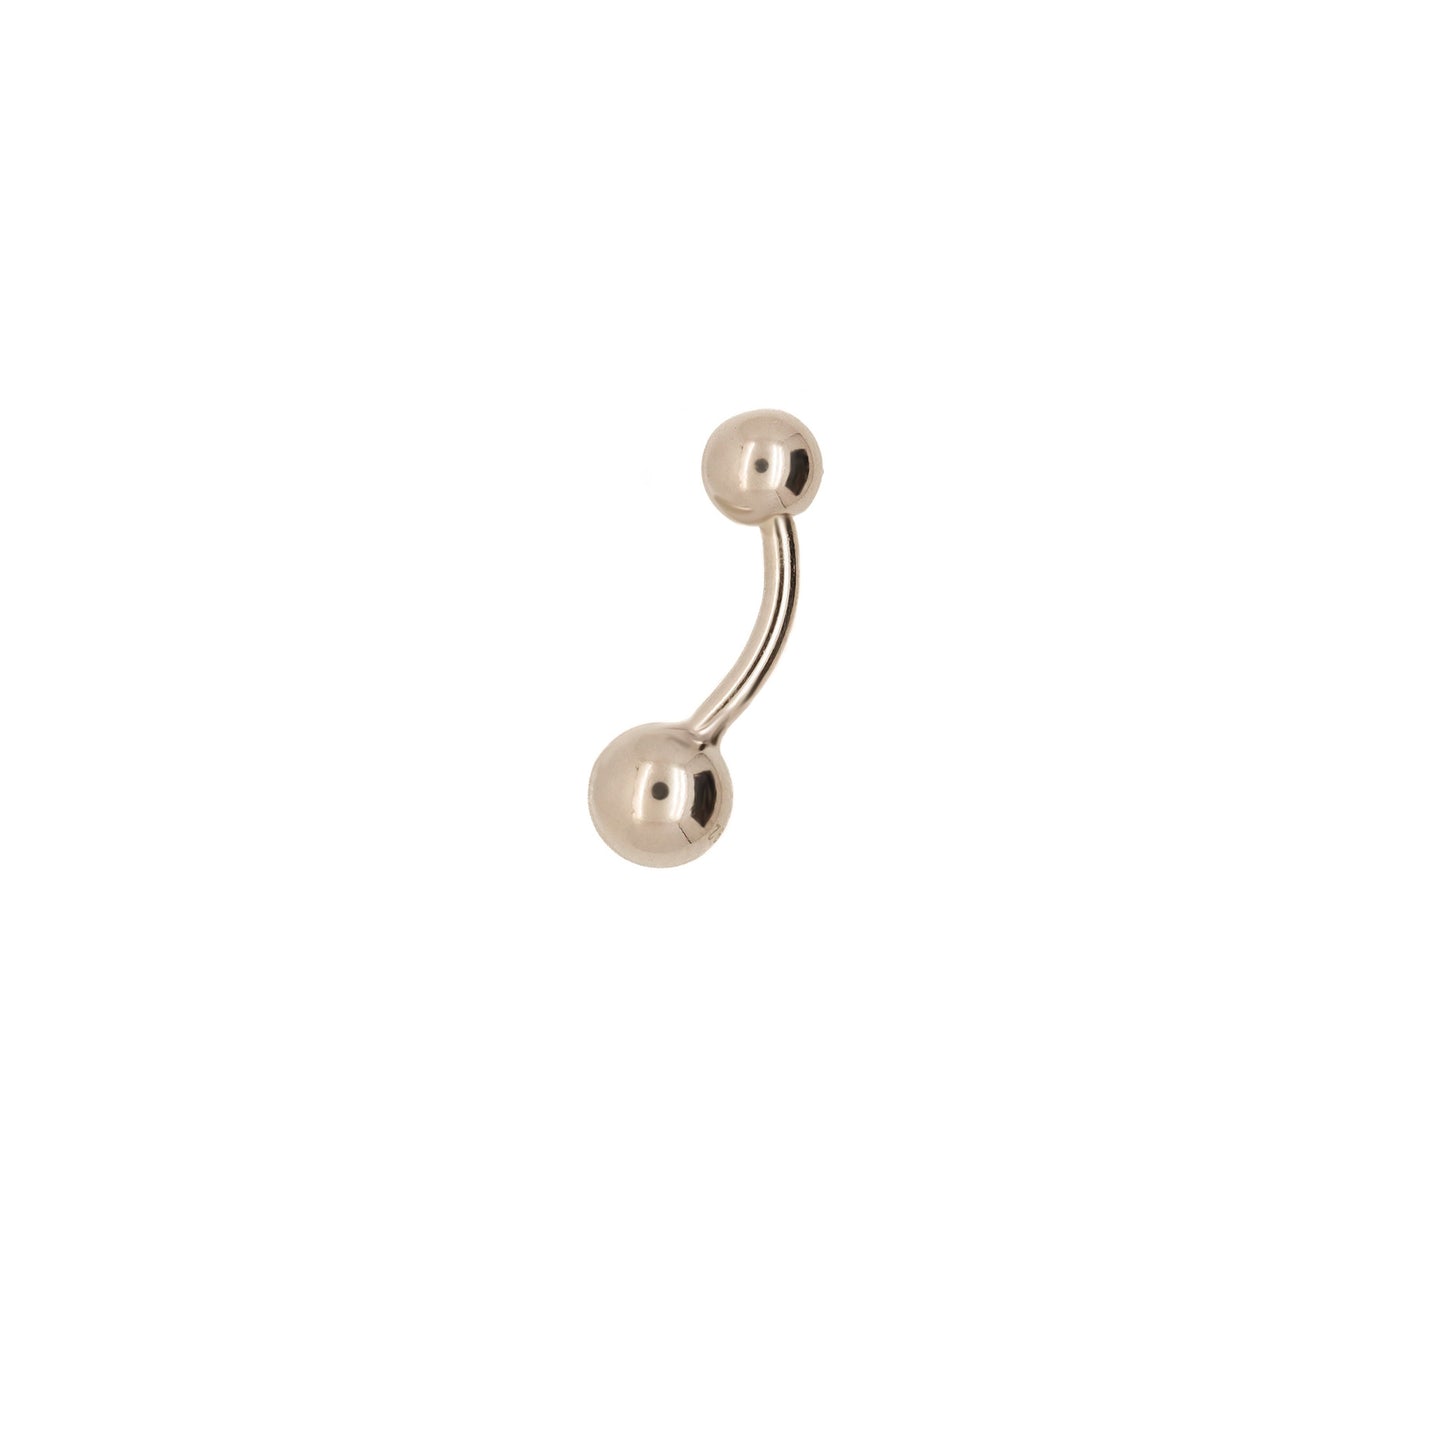 Solid 925 Silver | 16G/14G Tiny Classic Ball Belly Ring | 6mm 1/4" 8mm 5/16" 10mm 3/8" - Sturdy South